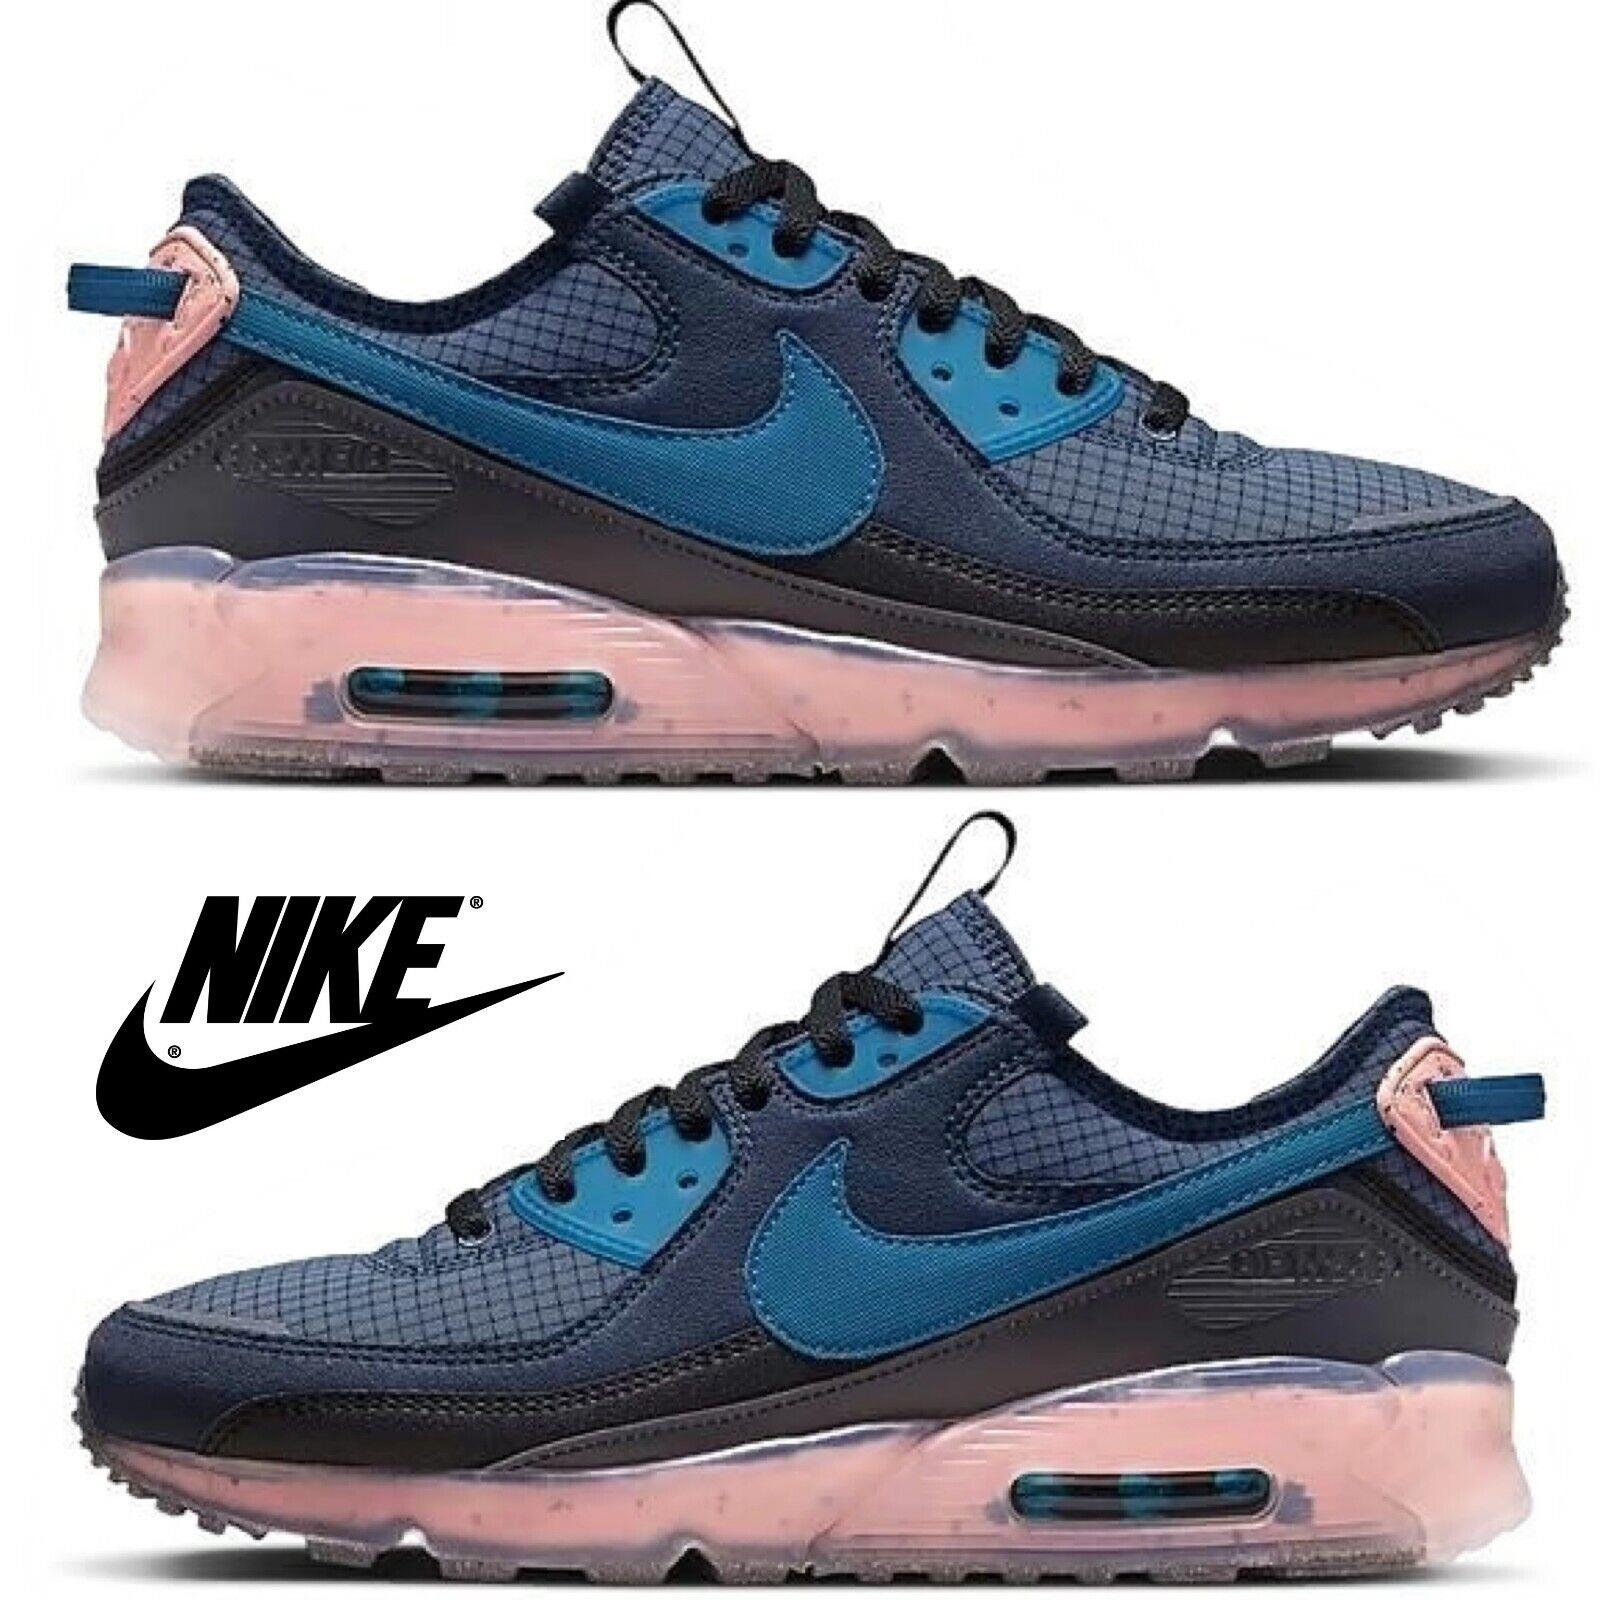 Nike shoes Air Max - Blue , Obsidian/Thunder Blue/Light Madder Root/Marina Maufacturer 8